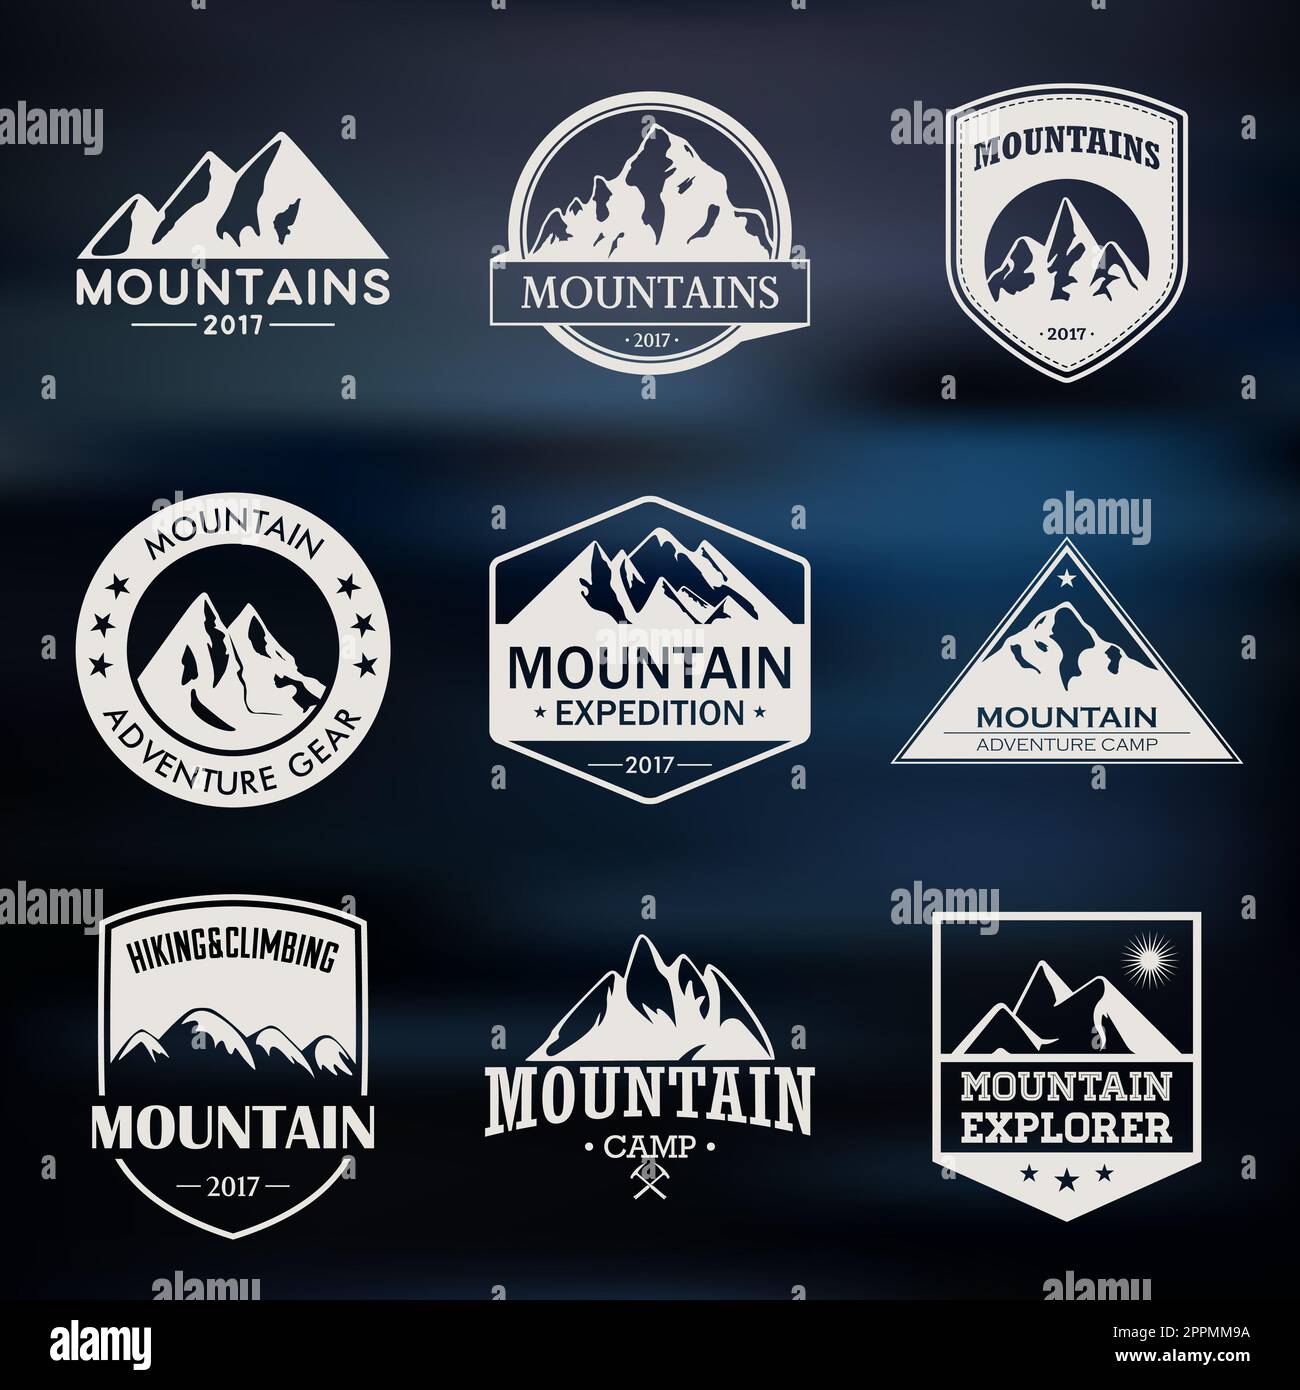 Mountain travel, outdoor adventures logo set. Hiking and climbing labels or icons for tourism organizations, events, camping leisure. Stock Photo